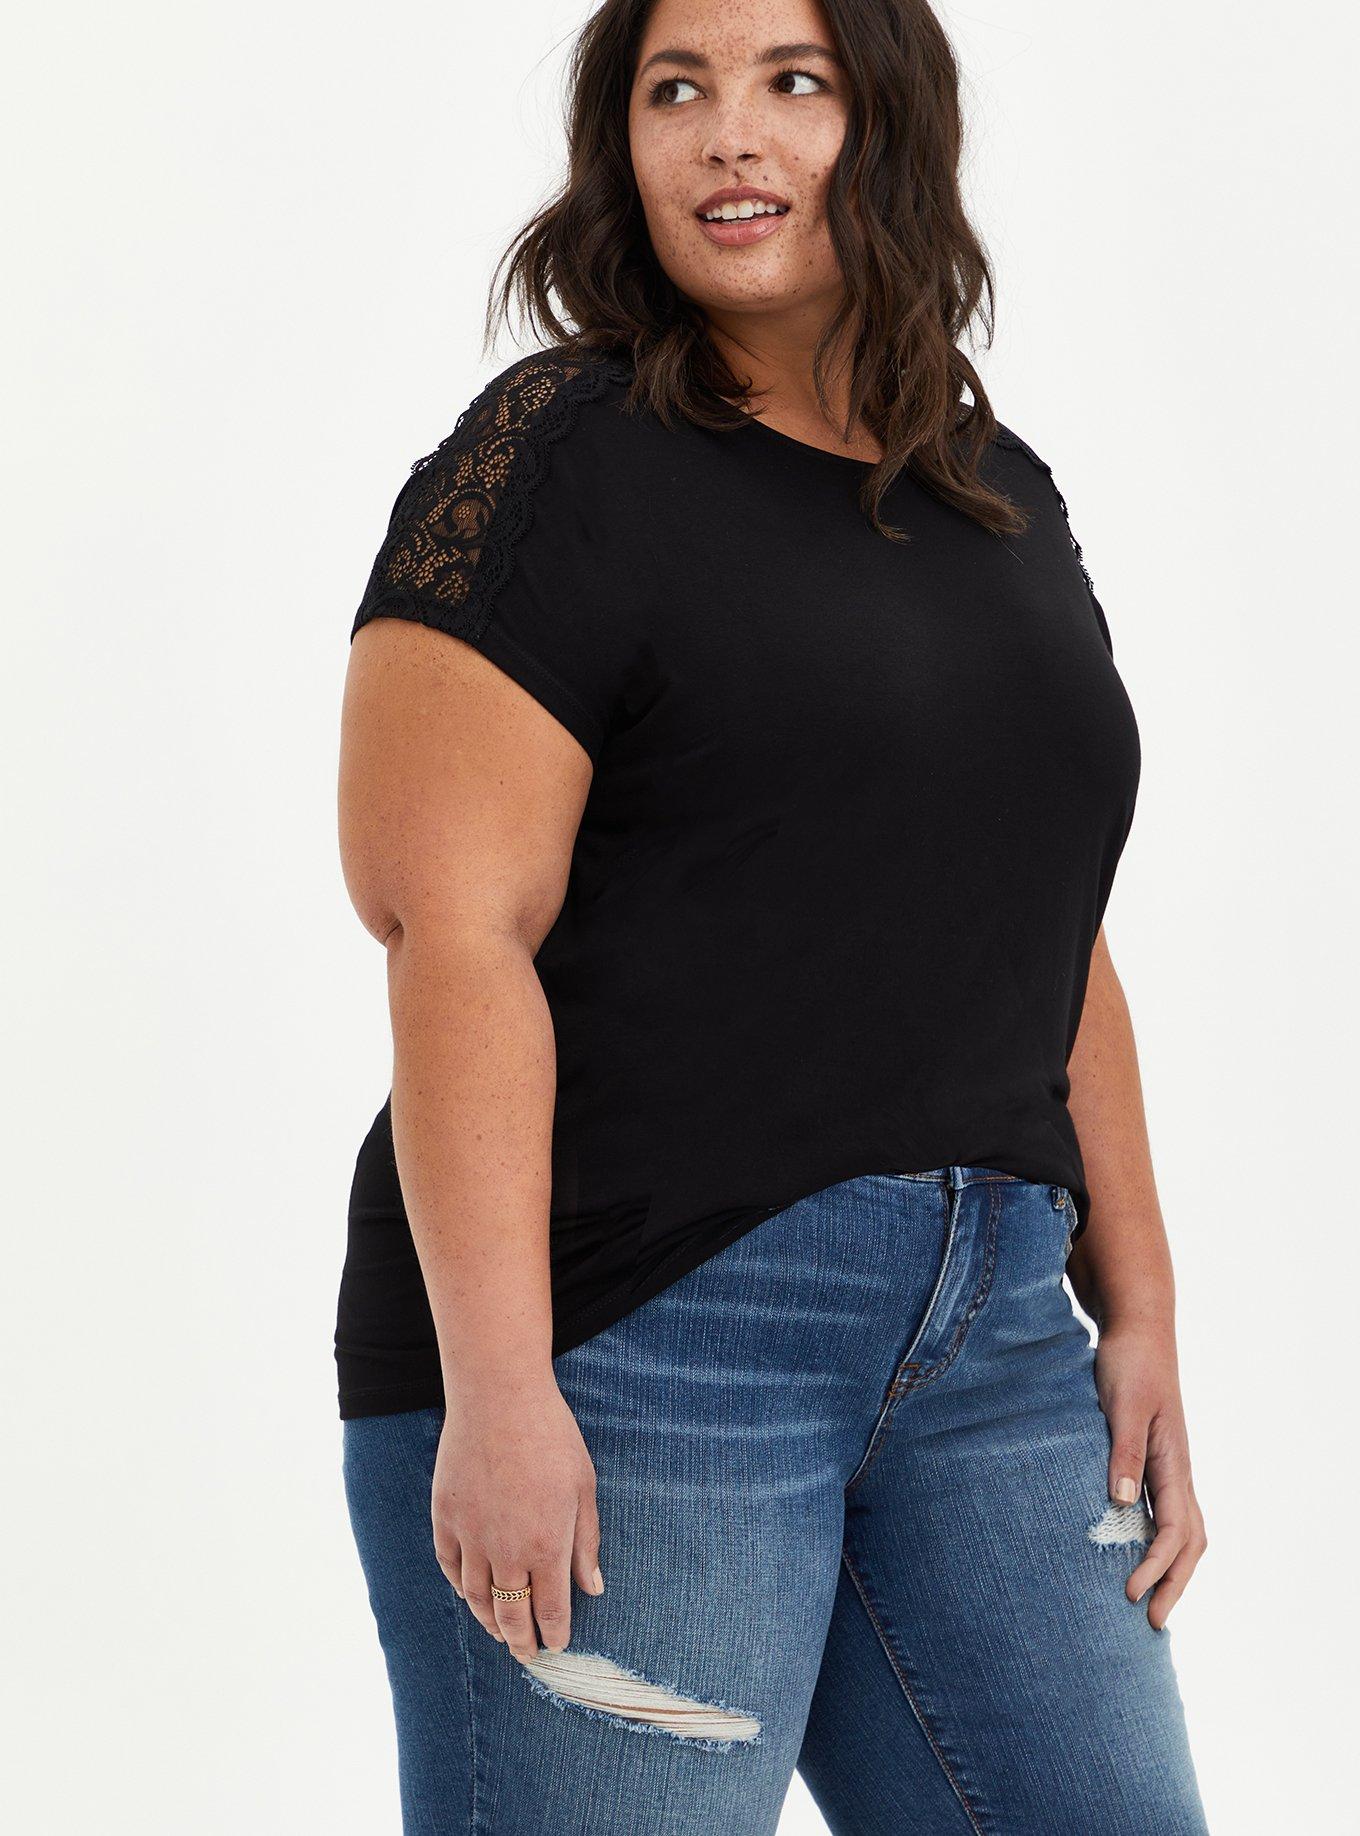 Plus Size - Relaxed Super Soft Crew Neck Lace Inset Dolman Tee - Torrid